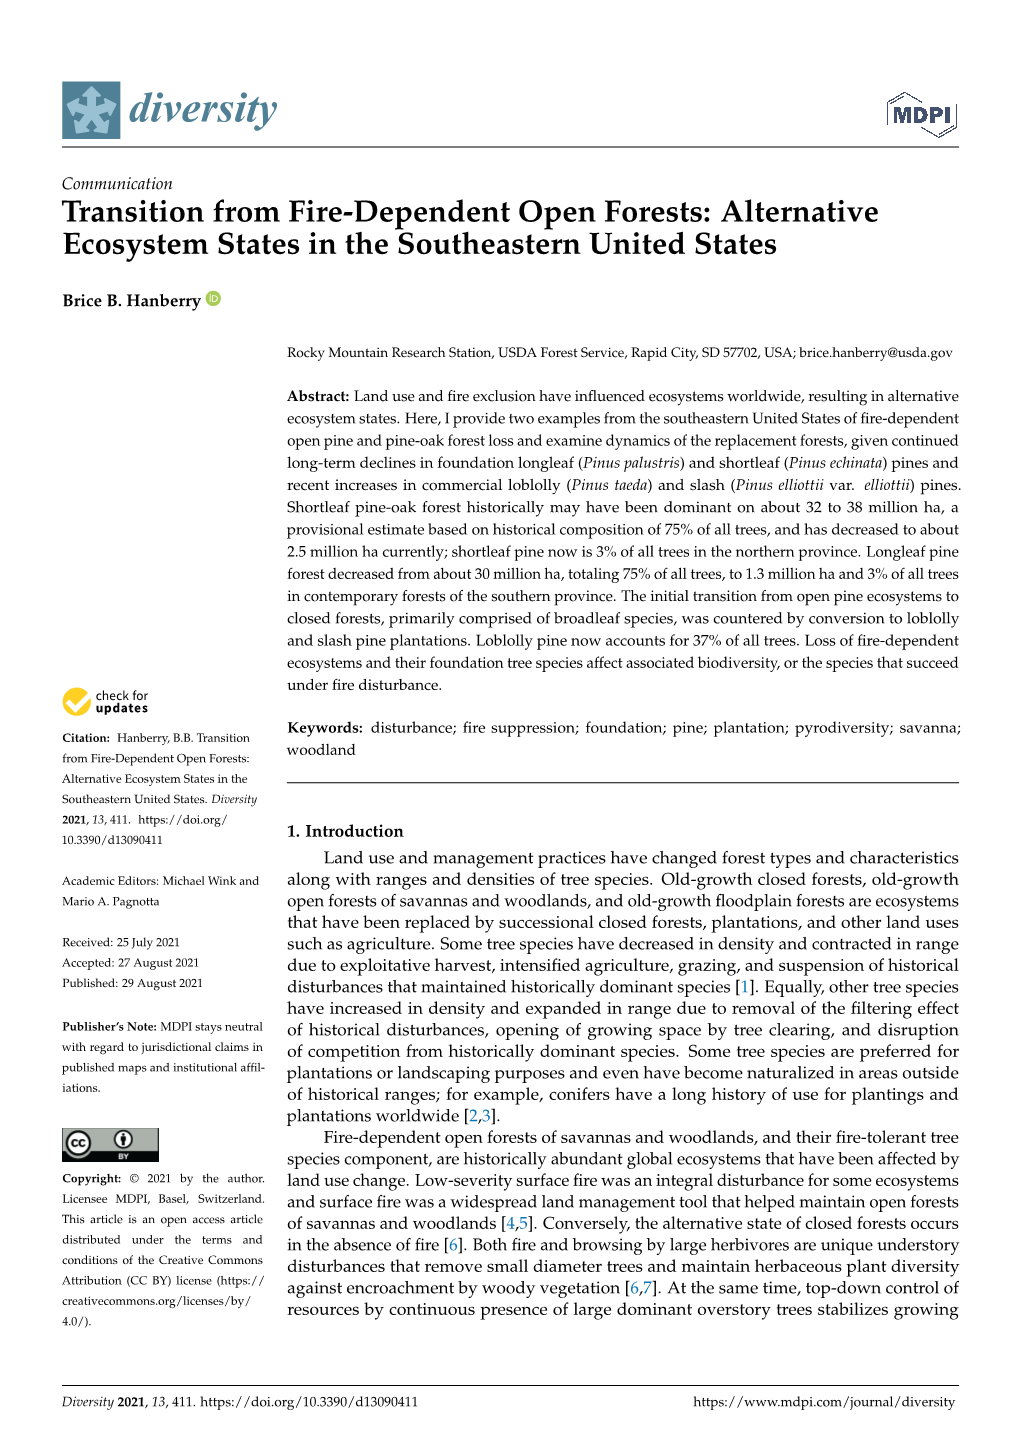 Transition from Fire-Dependent Open Forests: Alternative Ecosystem States in the Southeastern United States